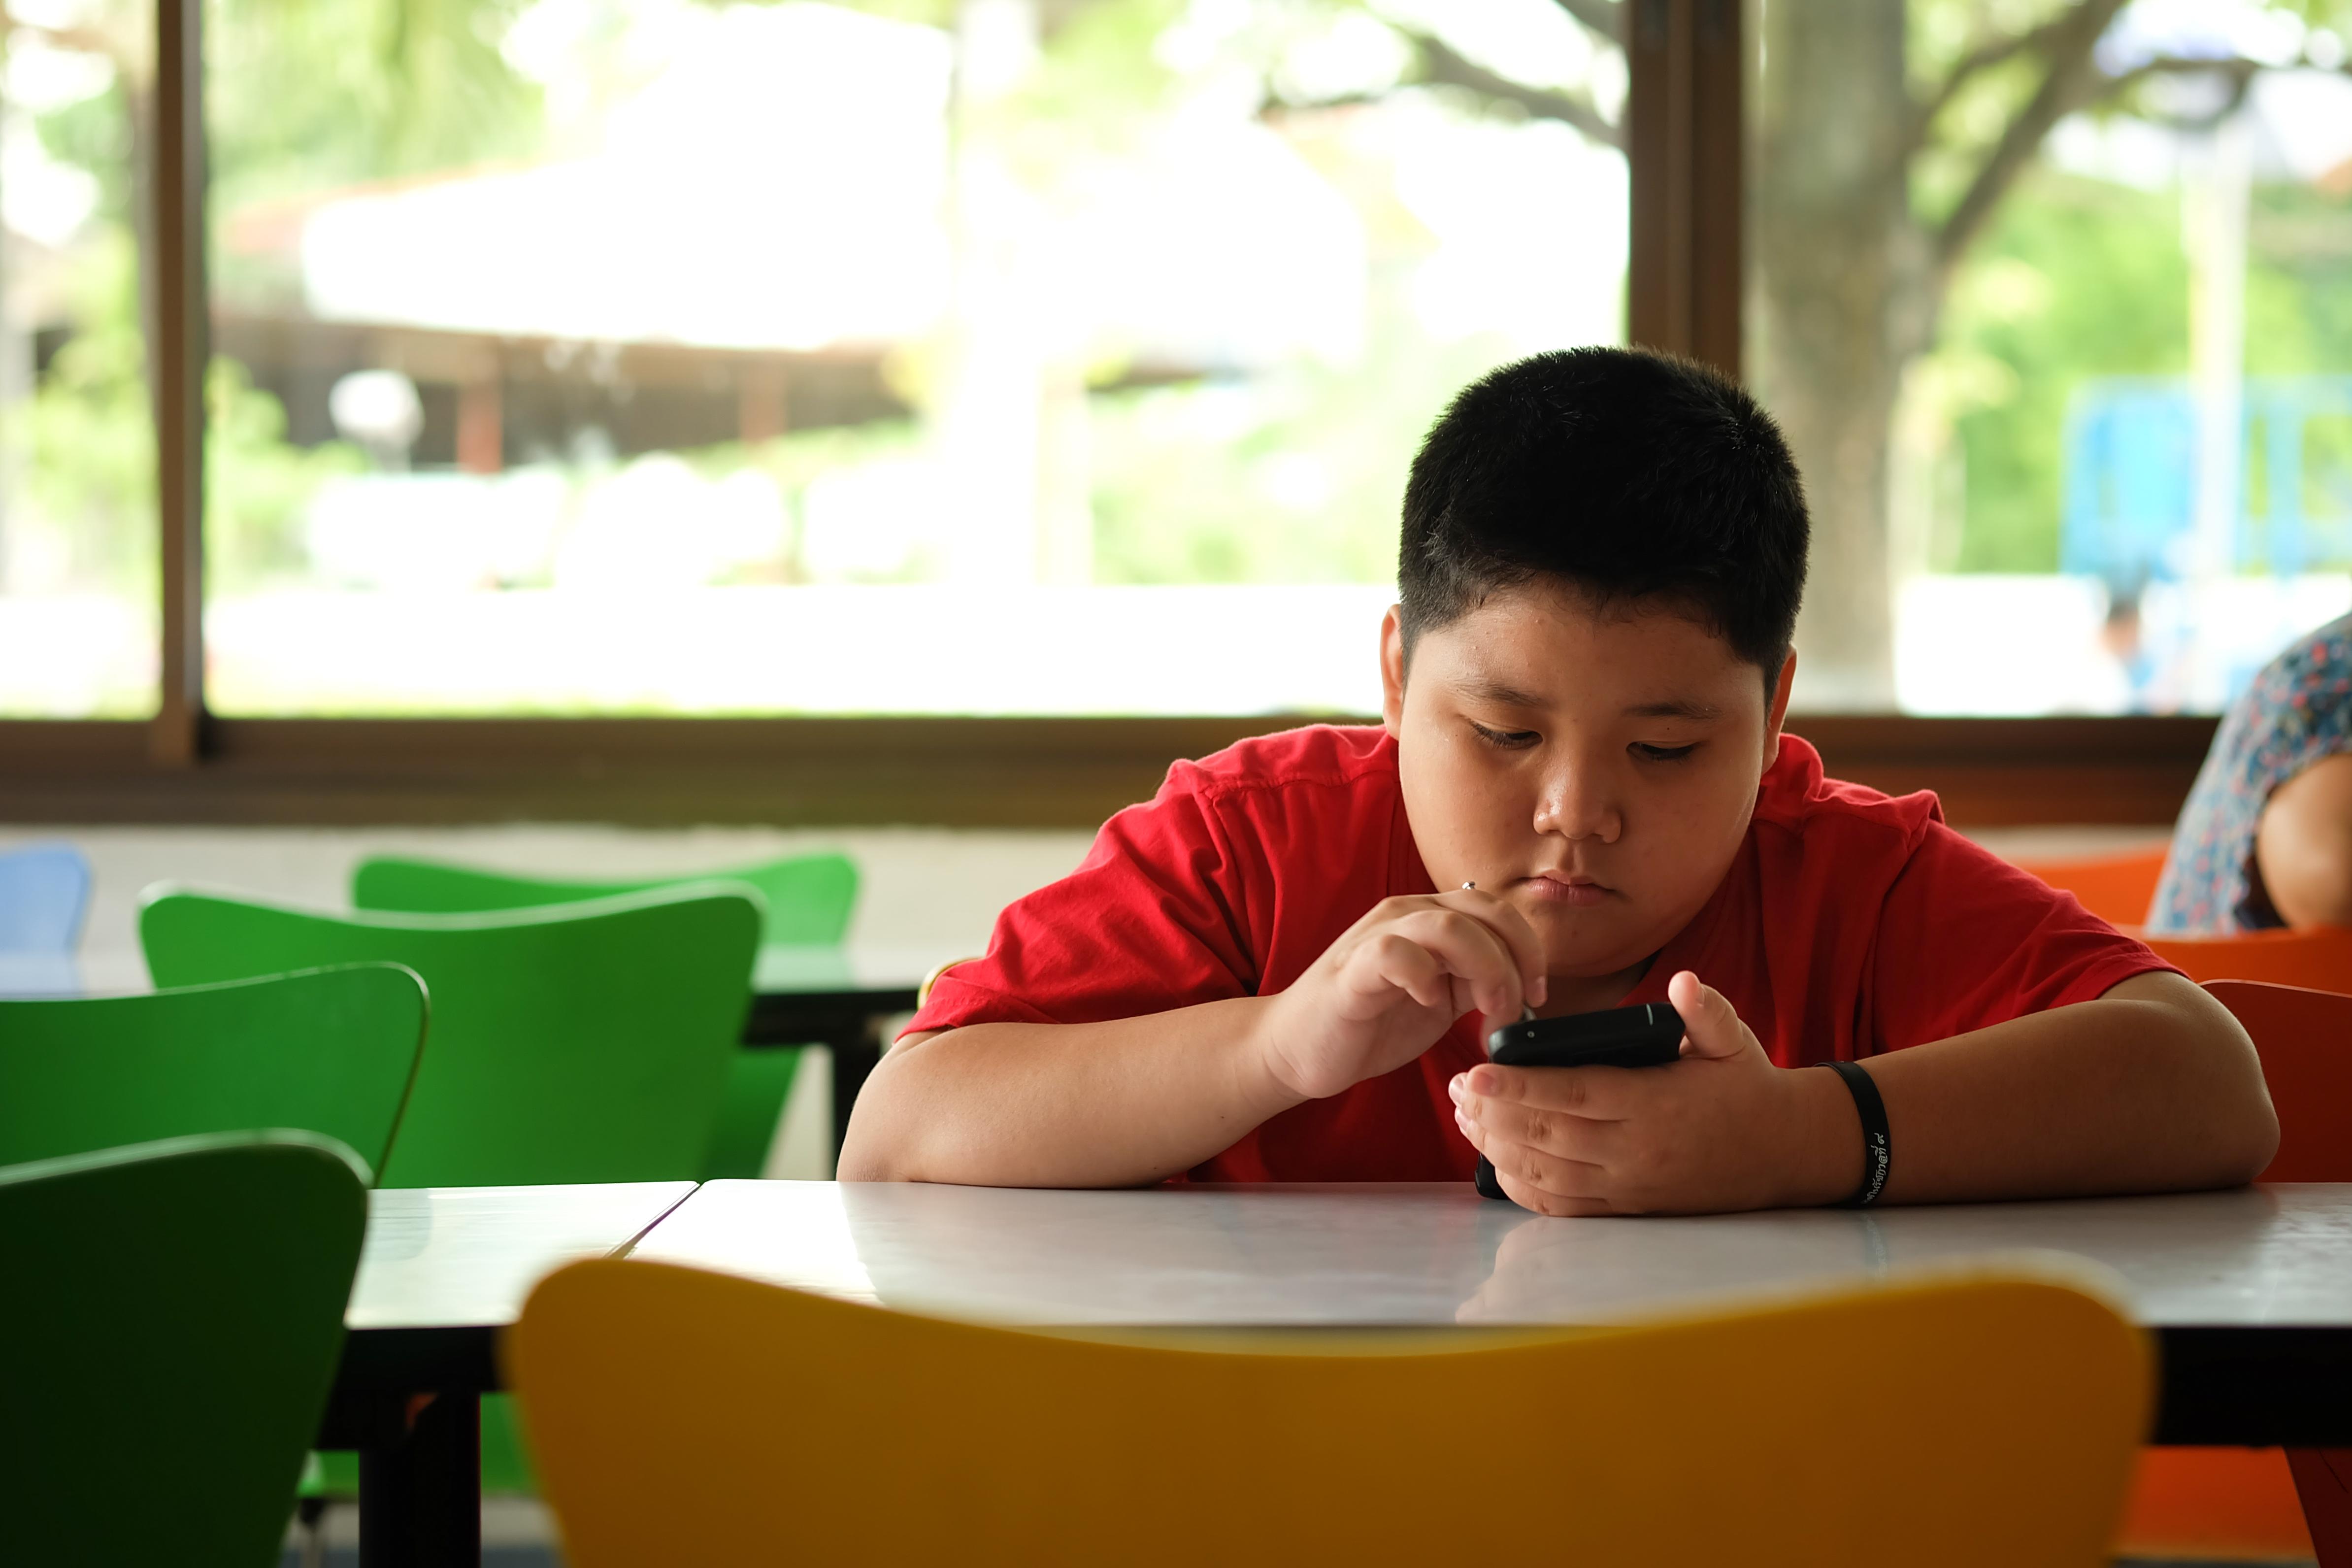 Is Screen Time One of the Main Causes of Childhood Obesity?